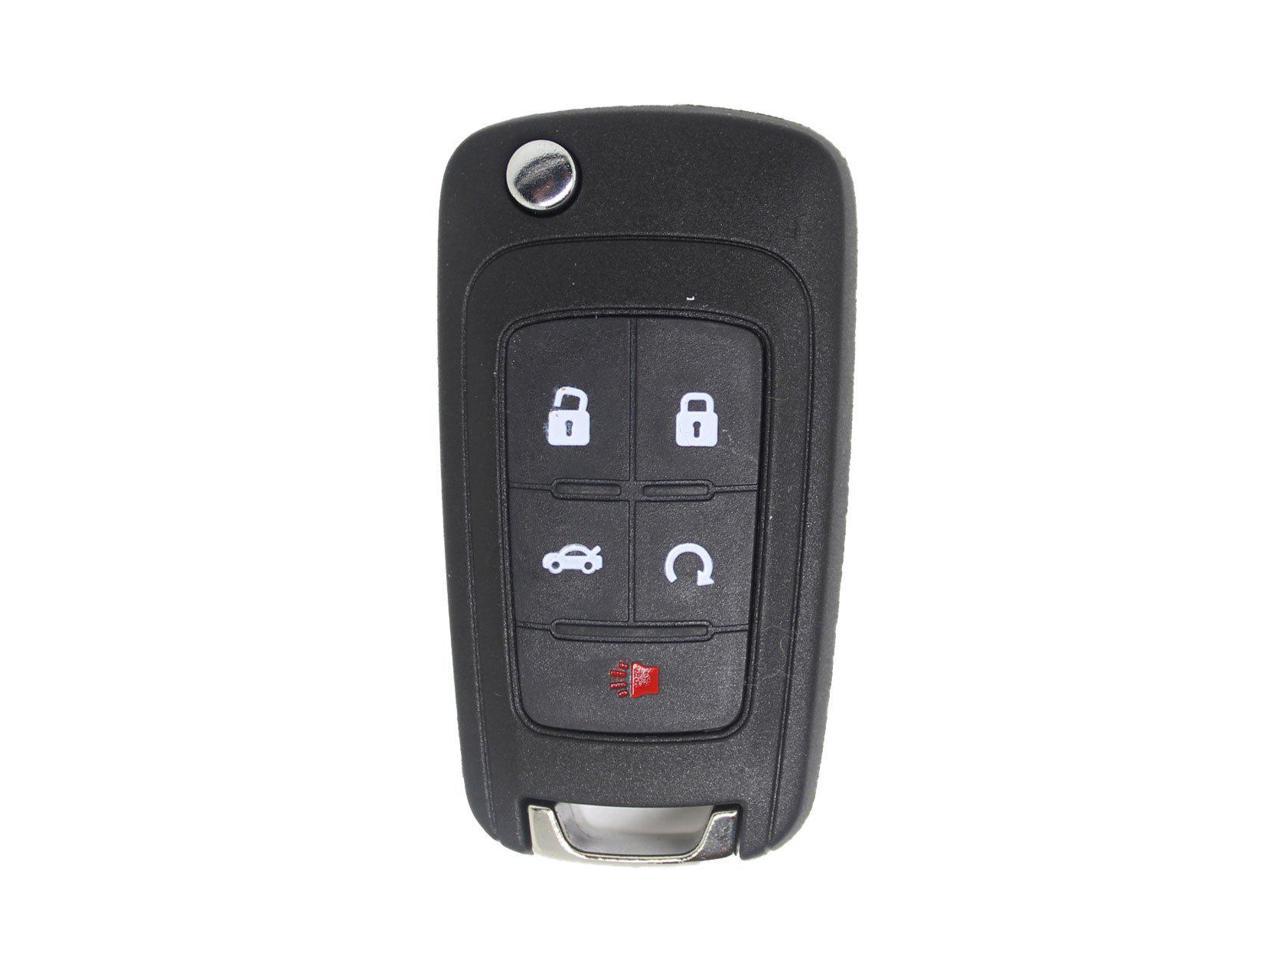 Pack of 2 KeylessOption Keyless Entry Remote Control Car Uncut Flip Key Fob Replacement for OHT01060512 